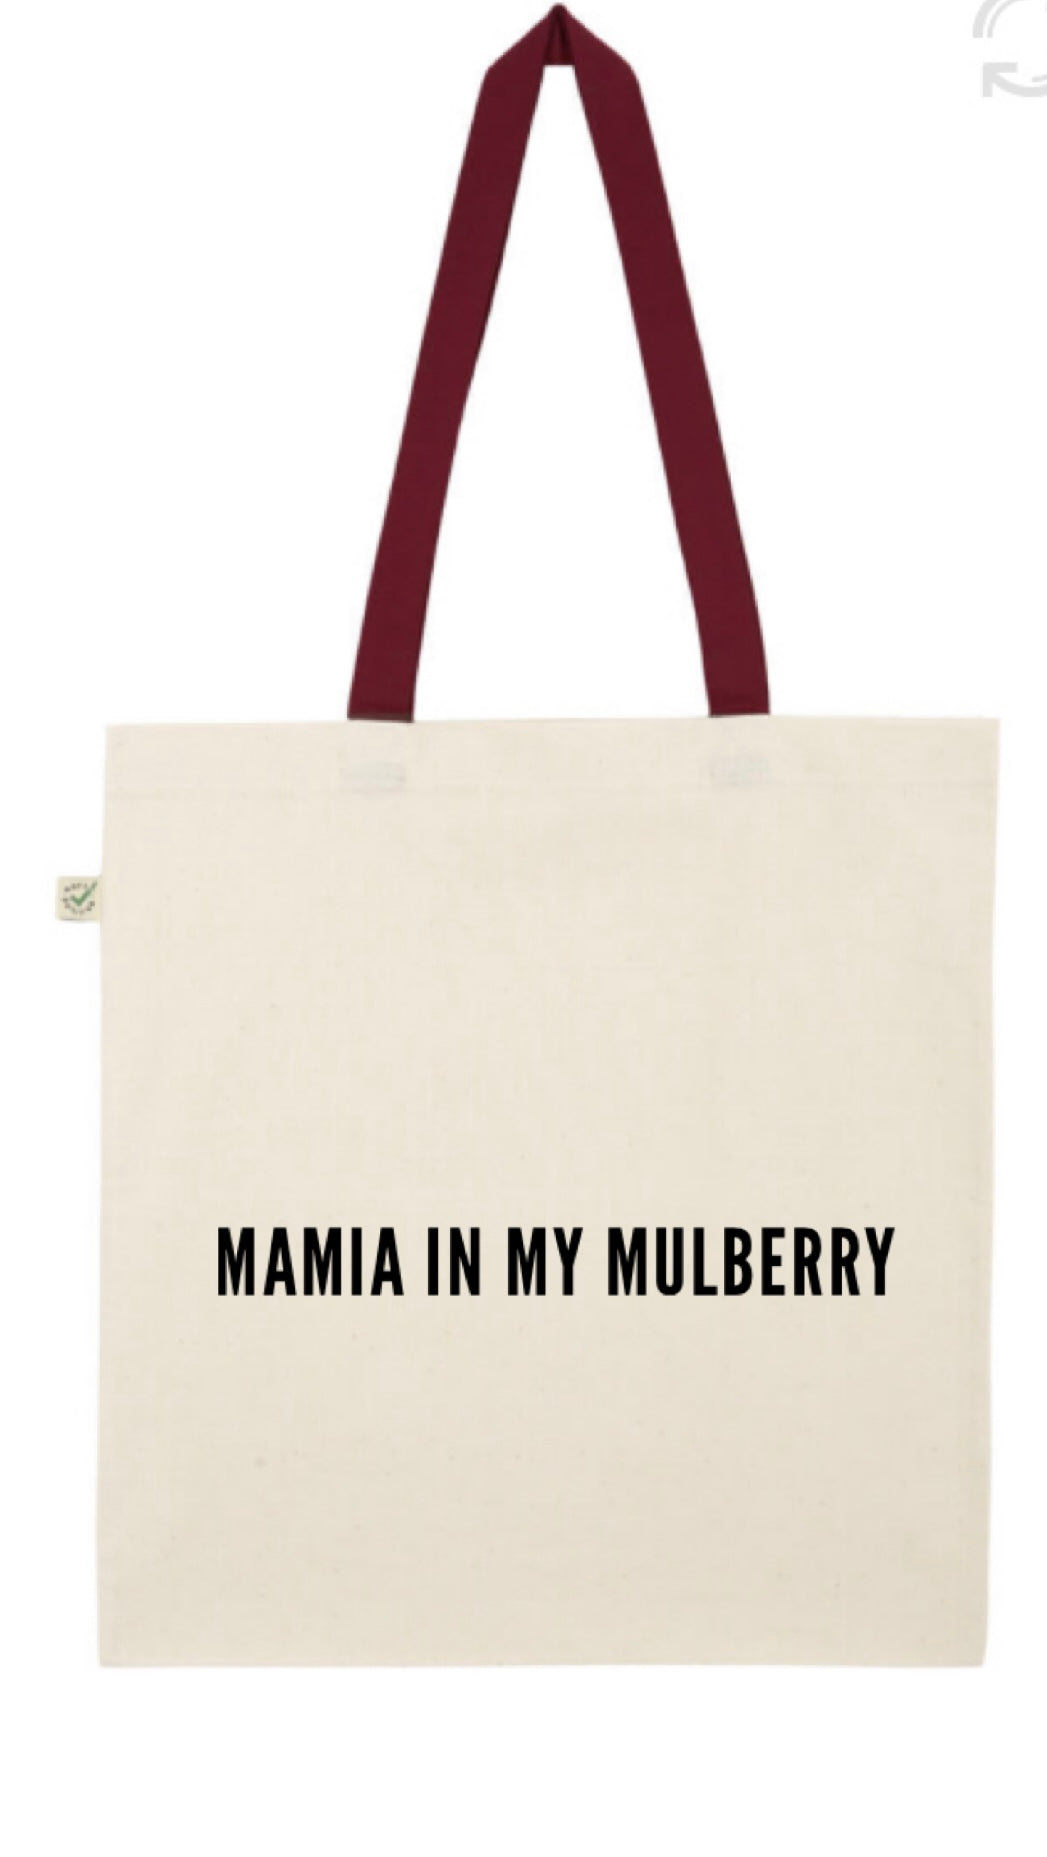 Mamia in my mulberry